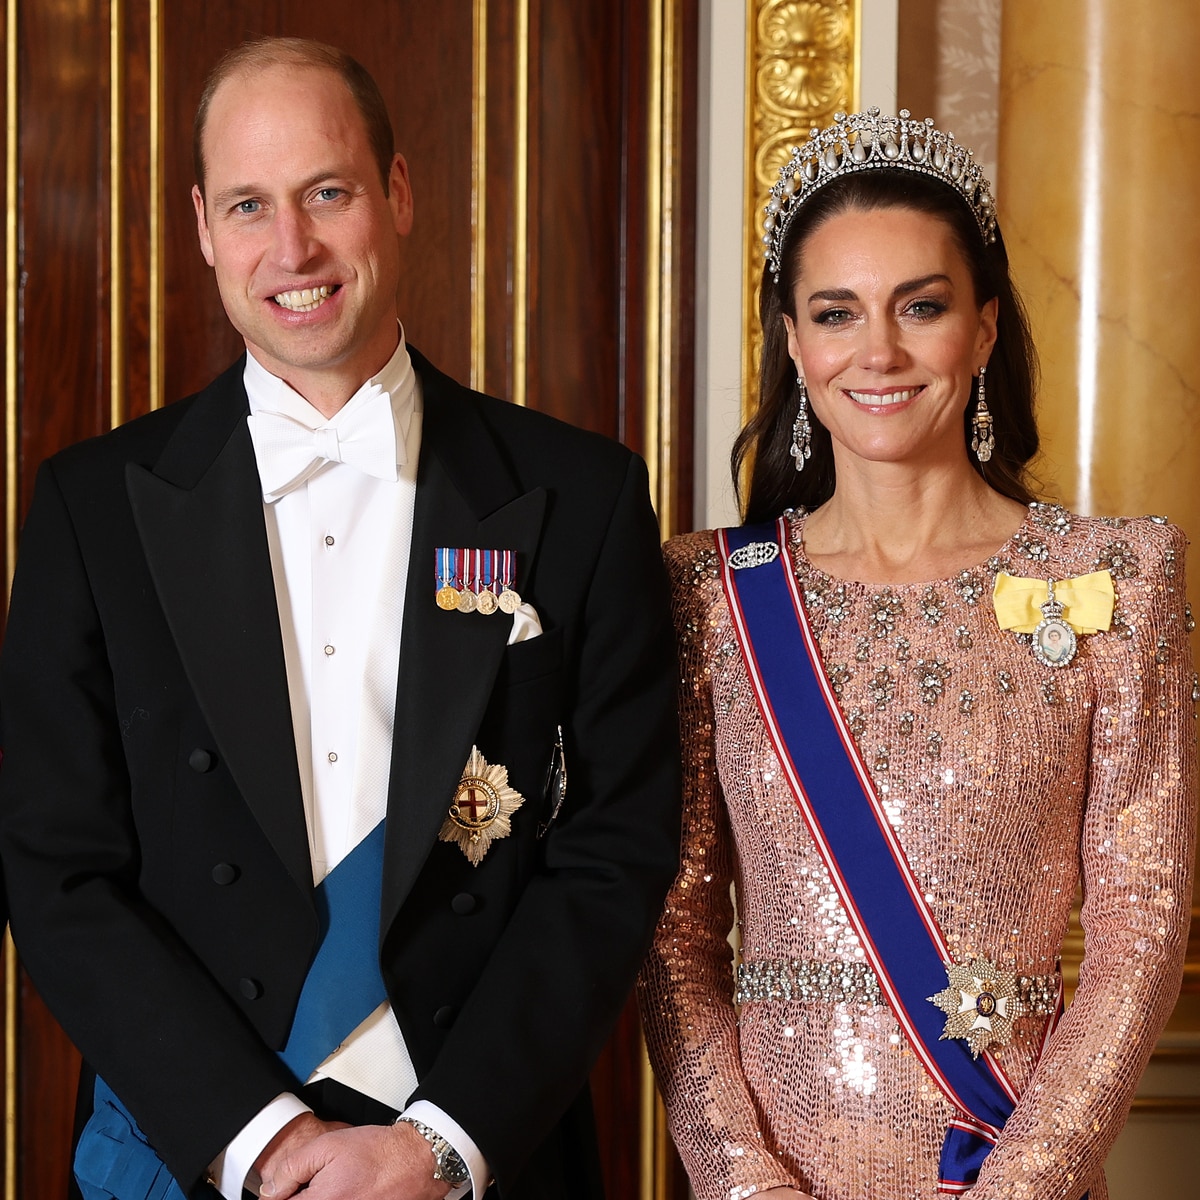 Queen Camilla, King Charles III, Prince William, Kate Middleton